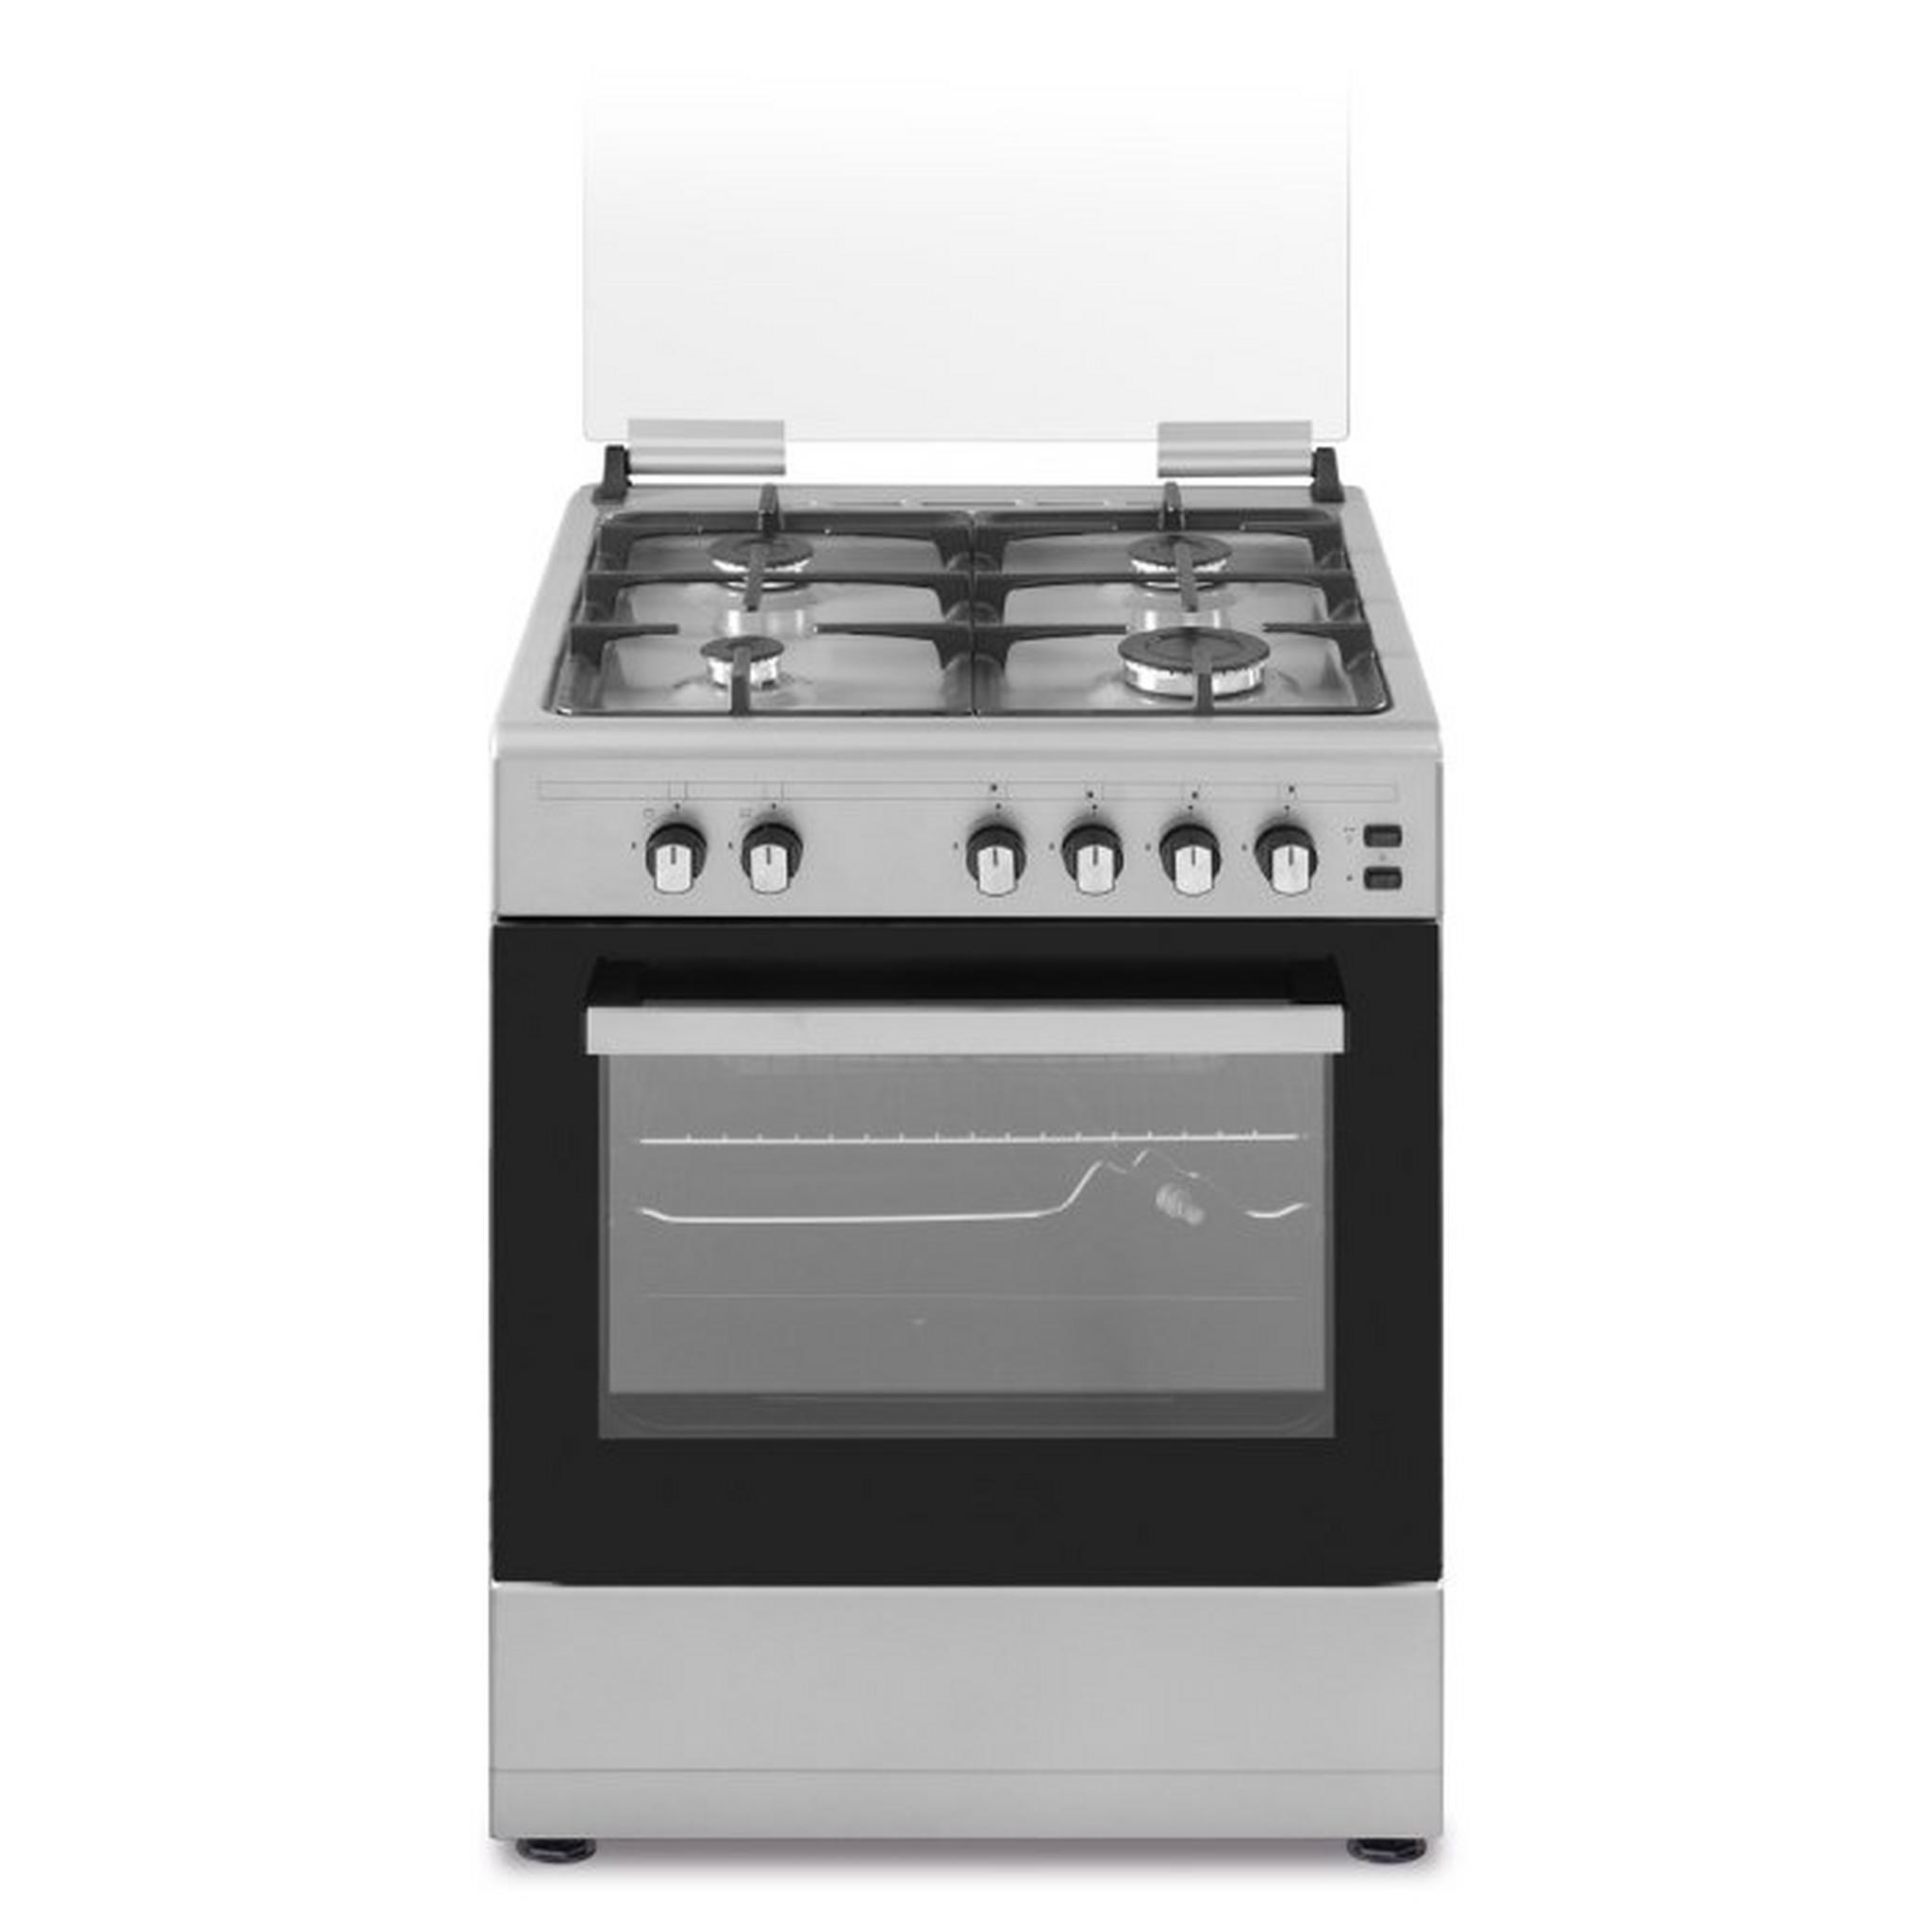 Wansa Gas Cooker 60X60 (WCT6401124X) Stainless Steel